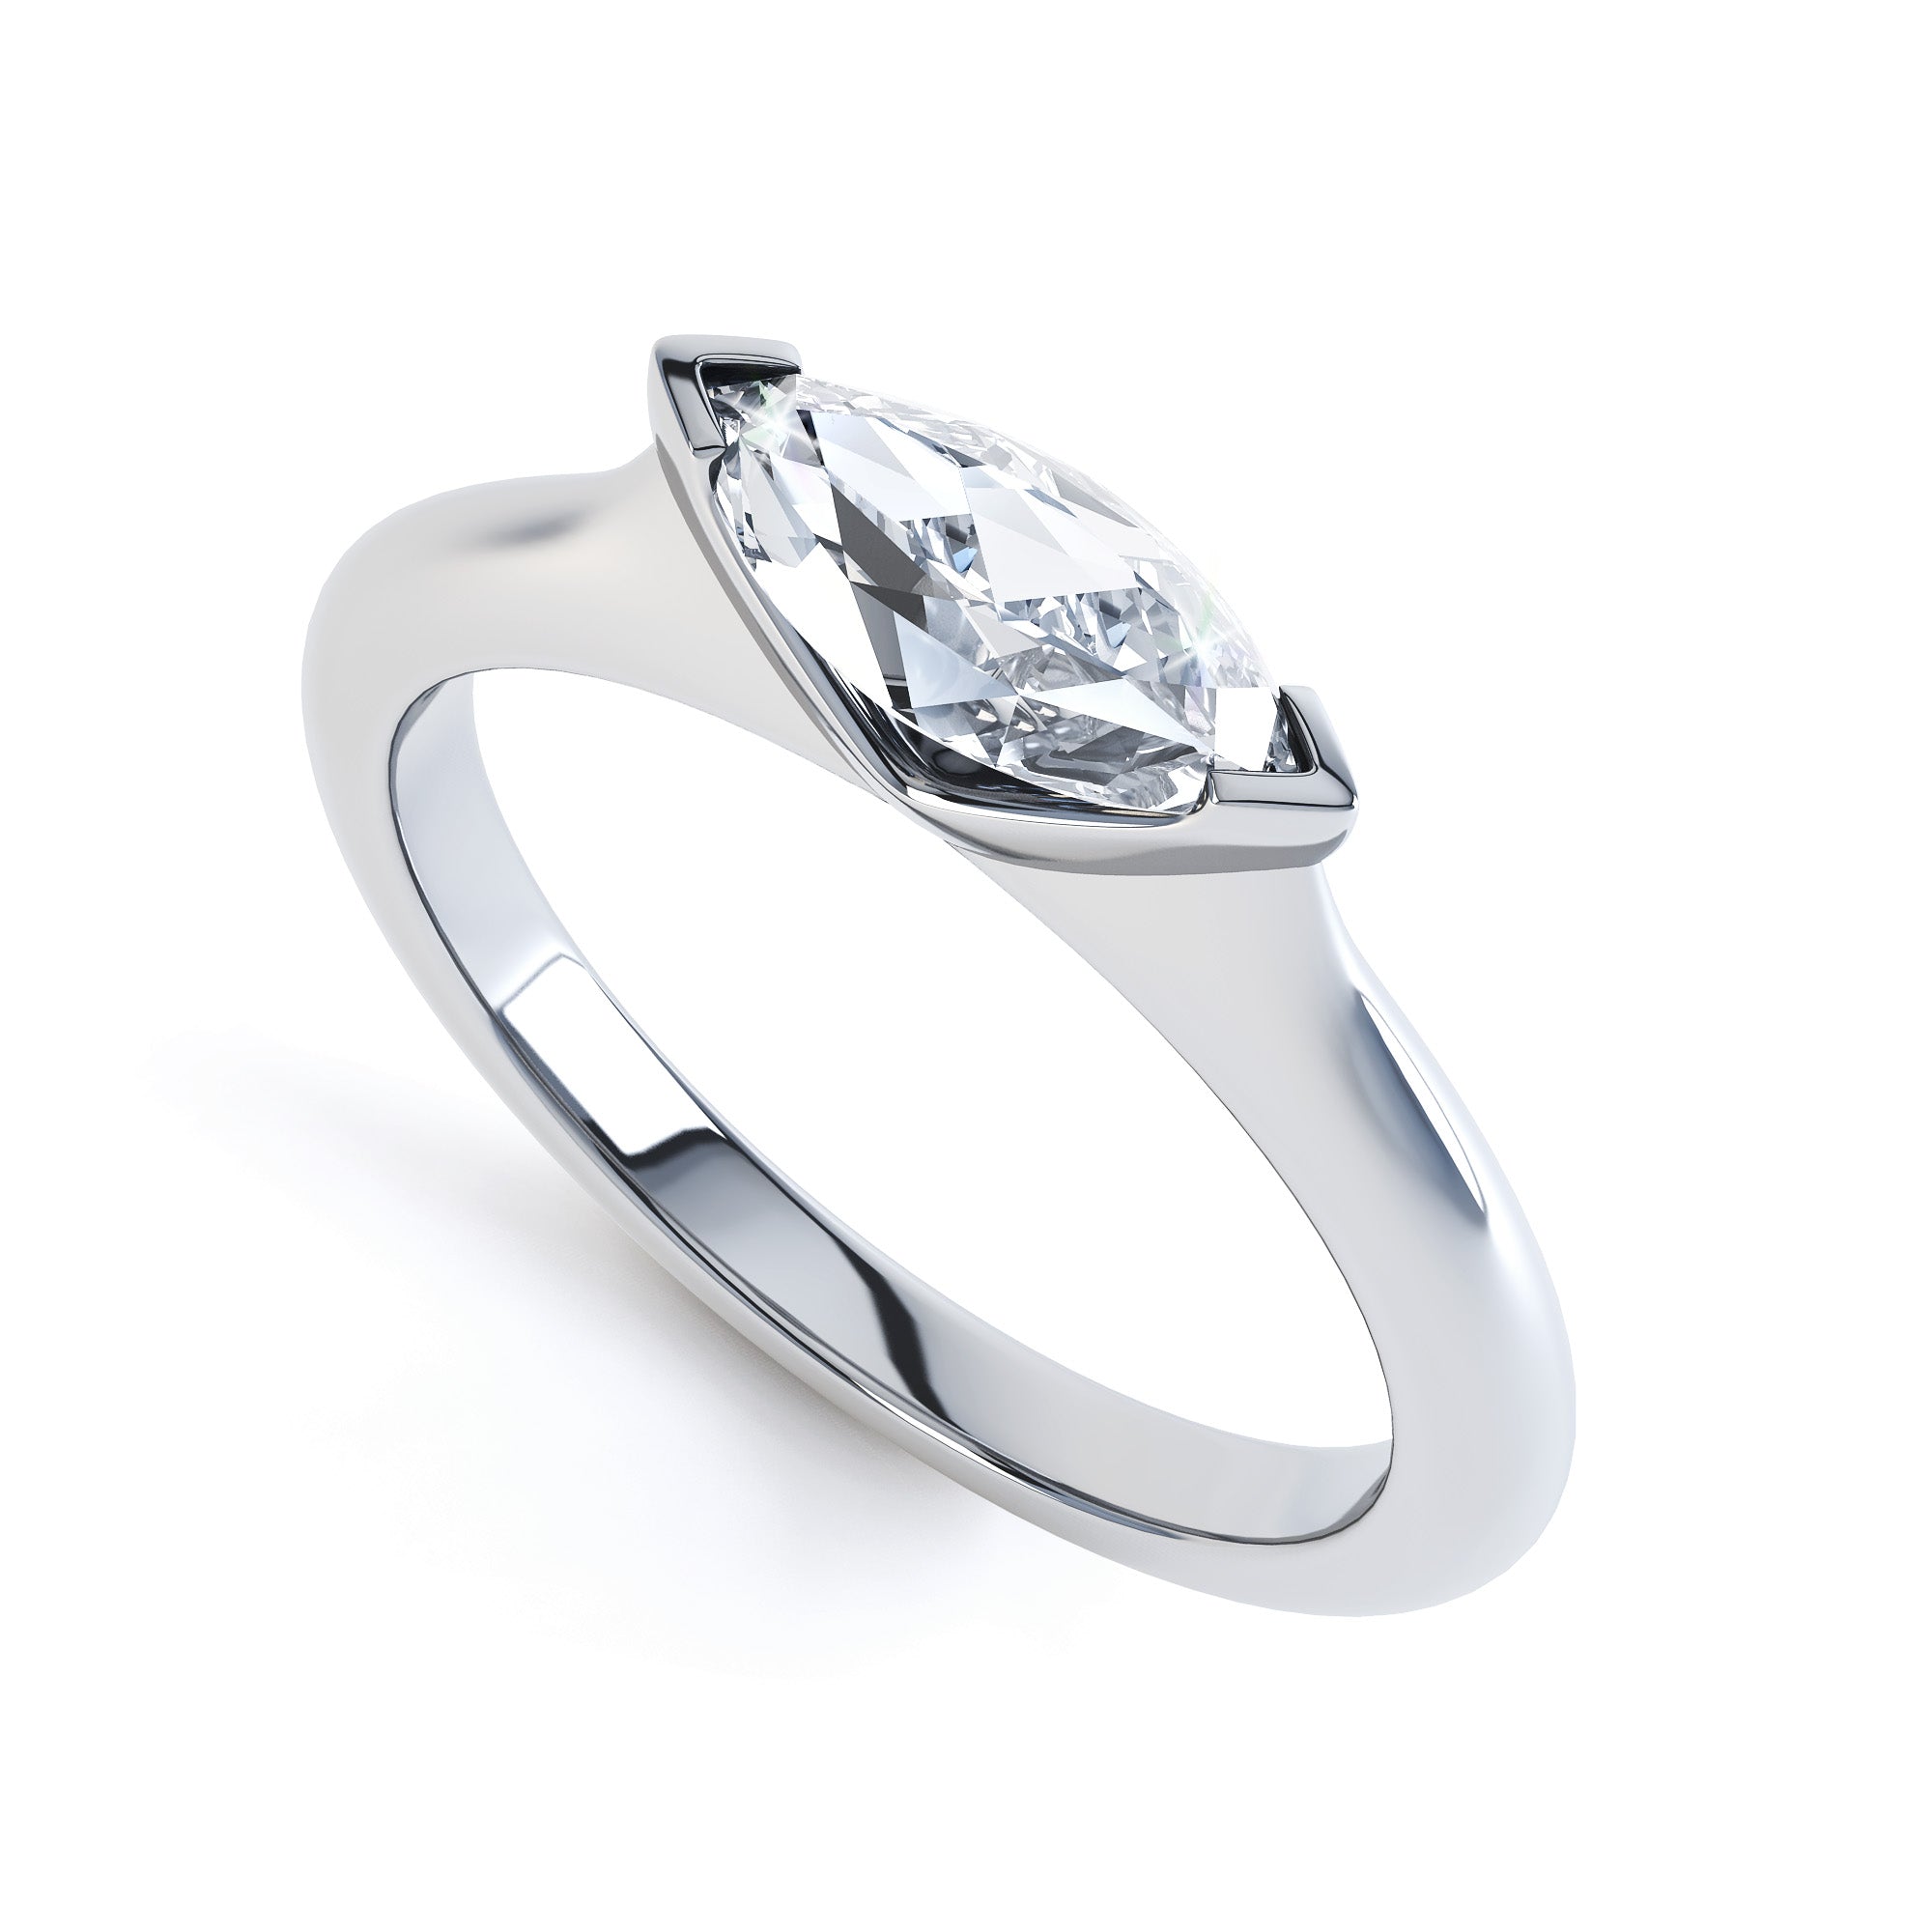 Marquise Cut Centre Stone, V claw, Diamond Engagement Ring with Knife Edge shoulders